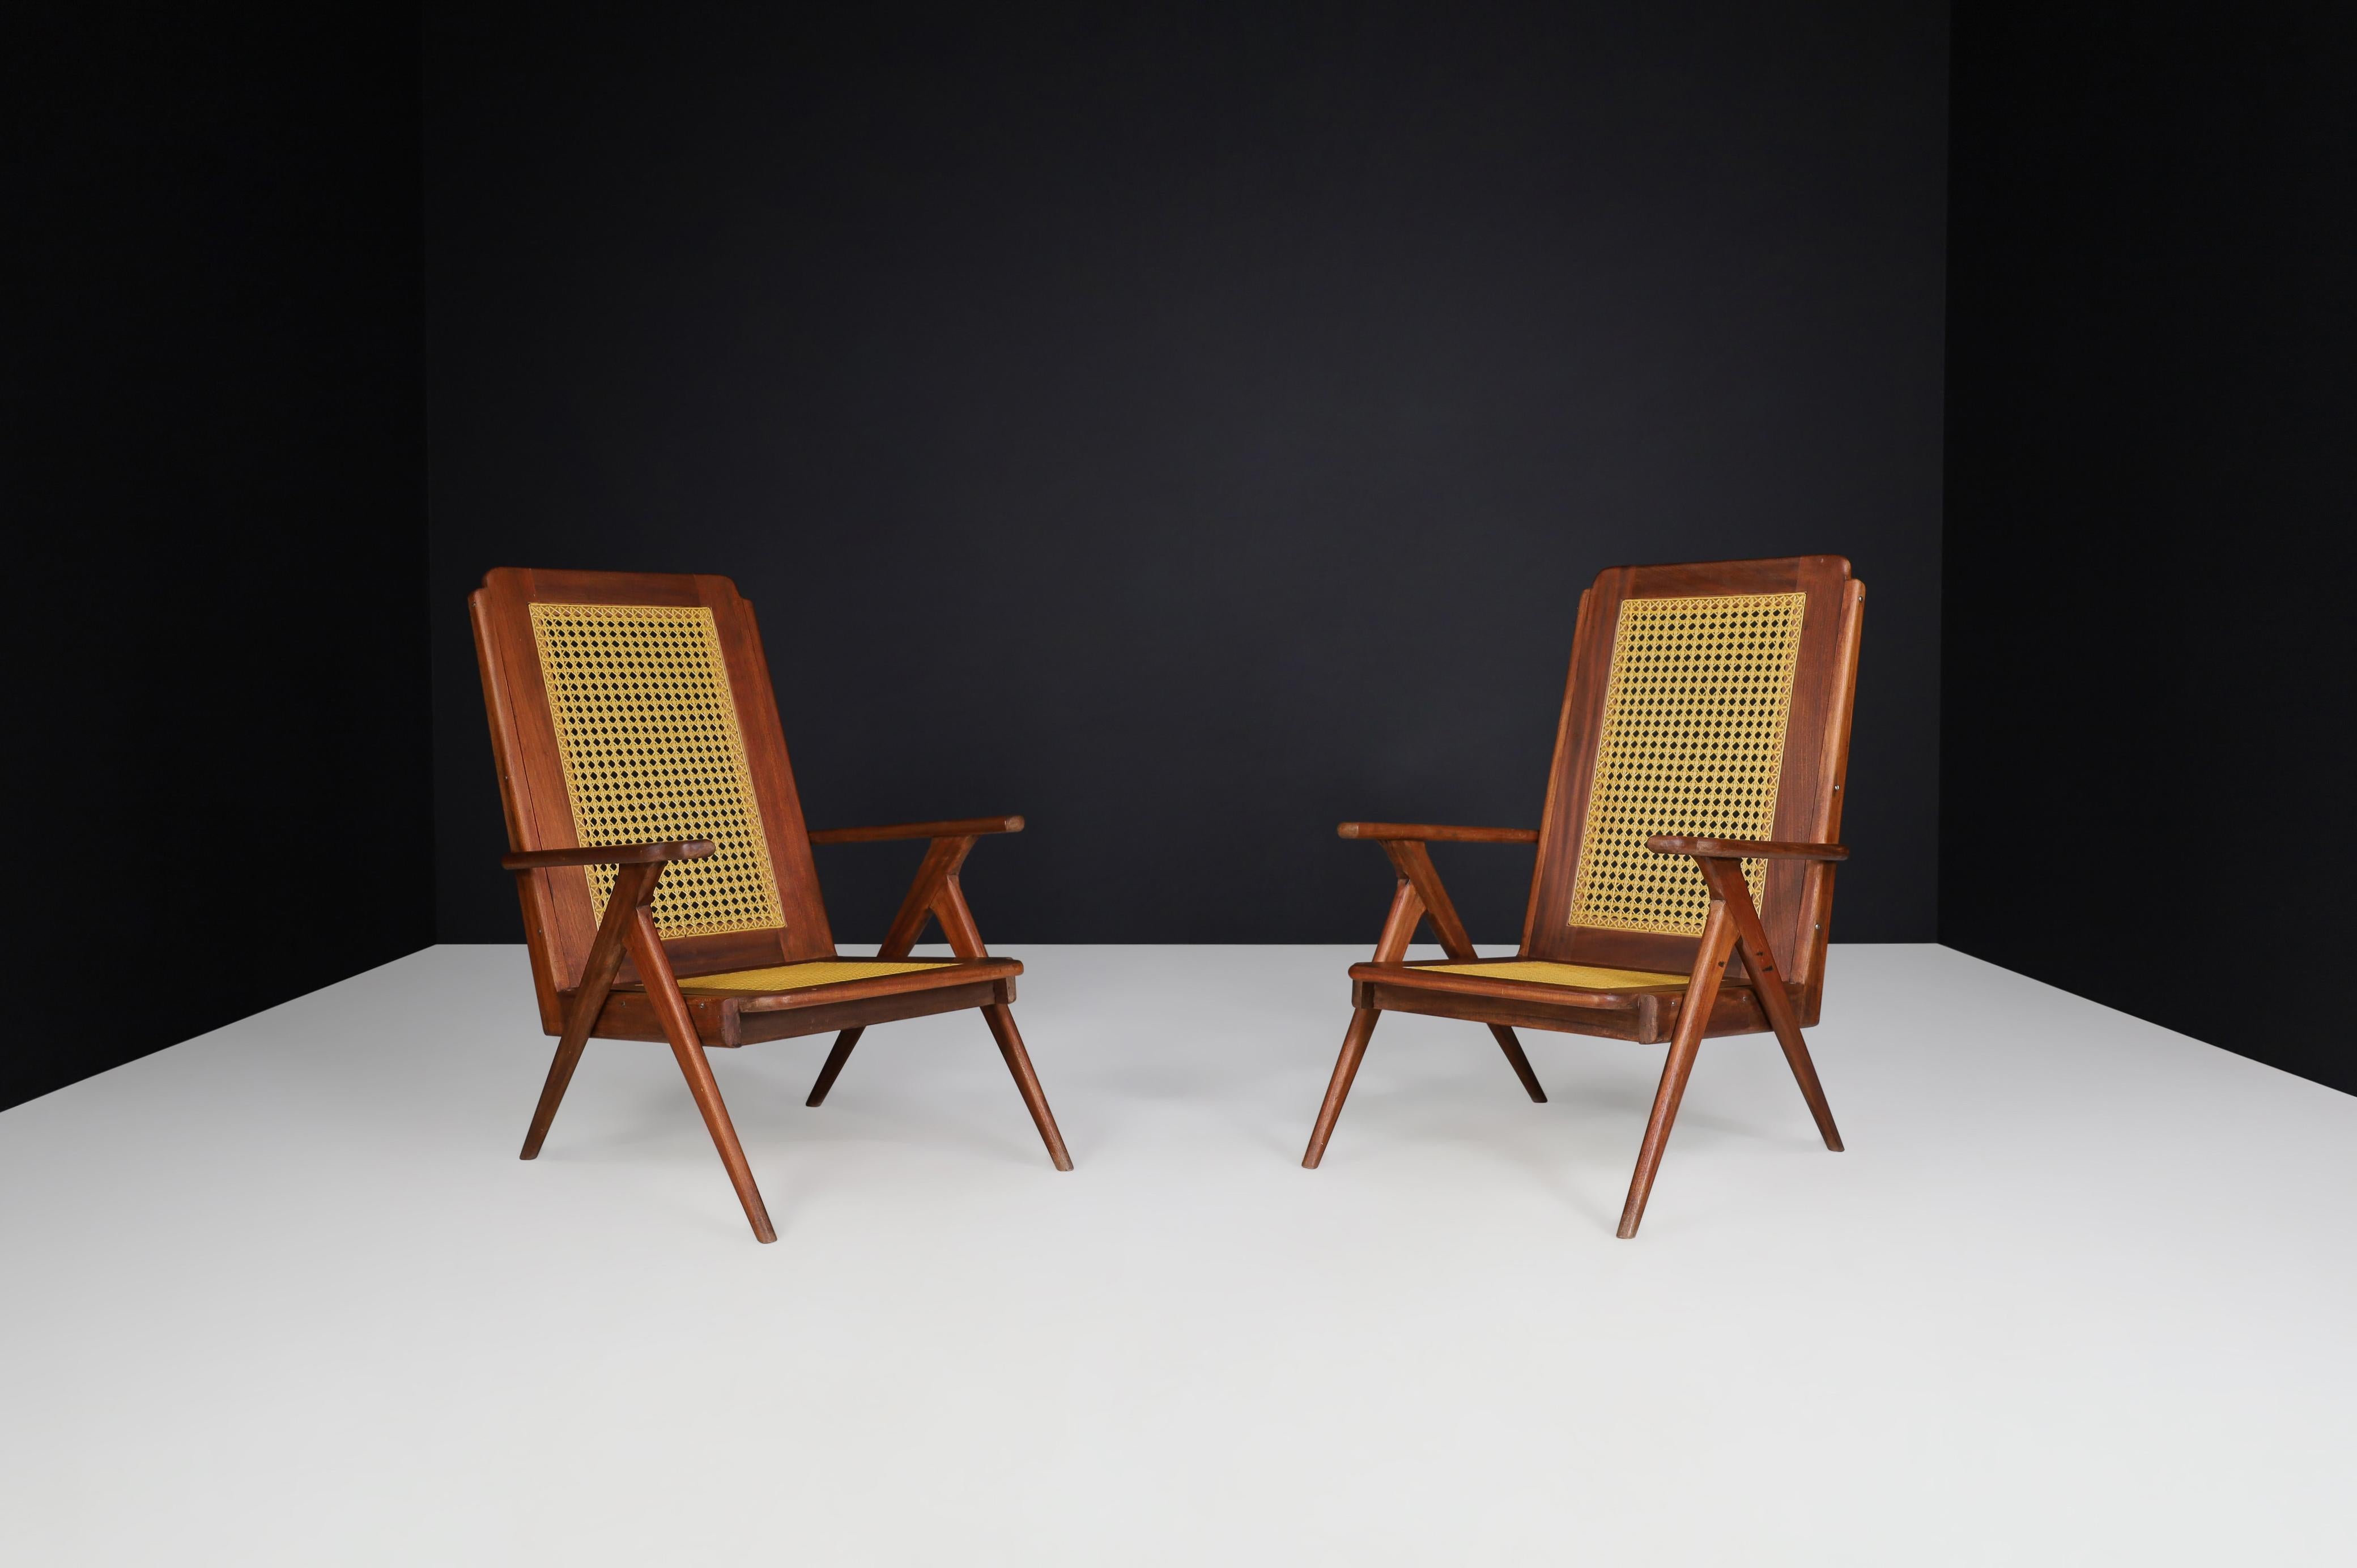 Lounge Chairs with Mahogany structure and Webbing, France 1950s For Sale 6